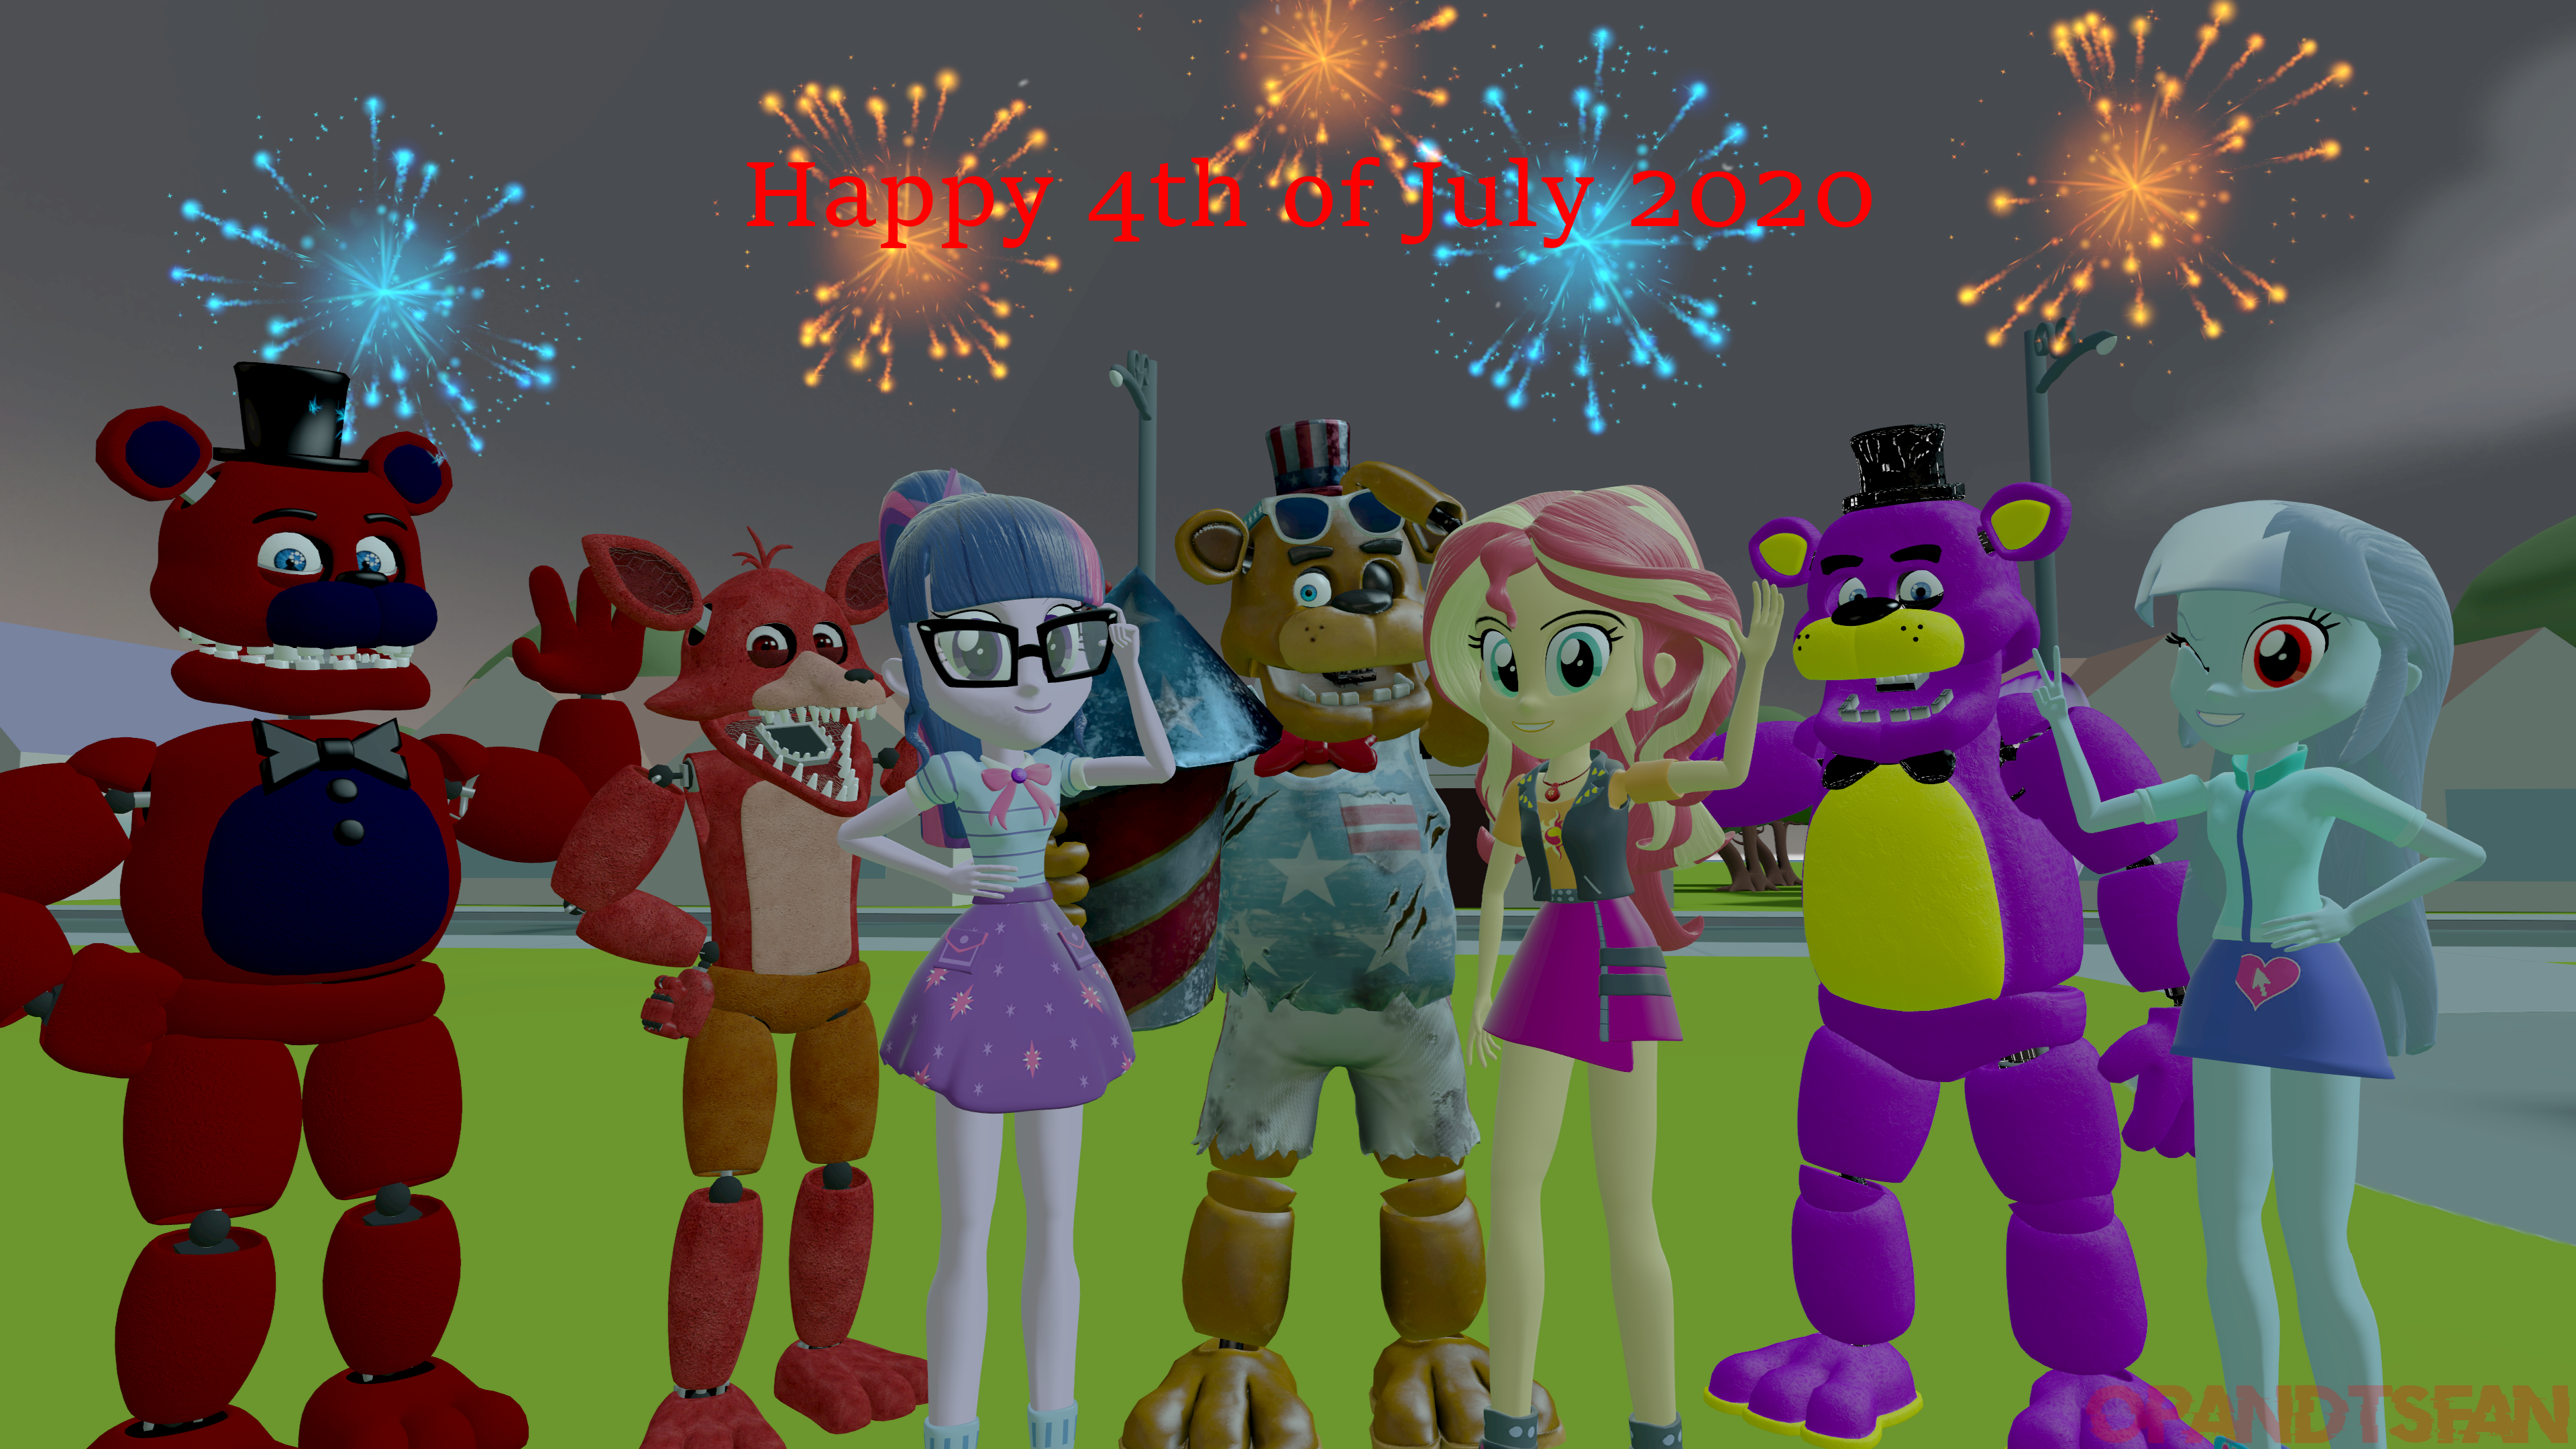 FNAF Five Night's at Freddy's Special Delivery Fireworks 6 Freddy